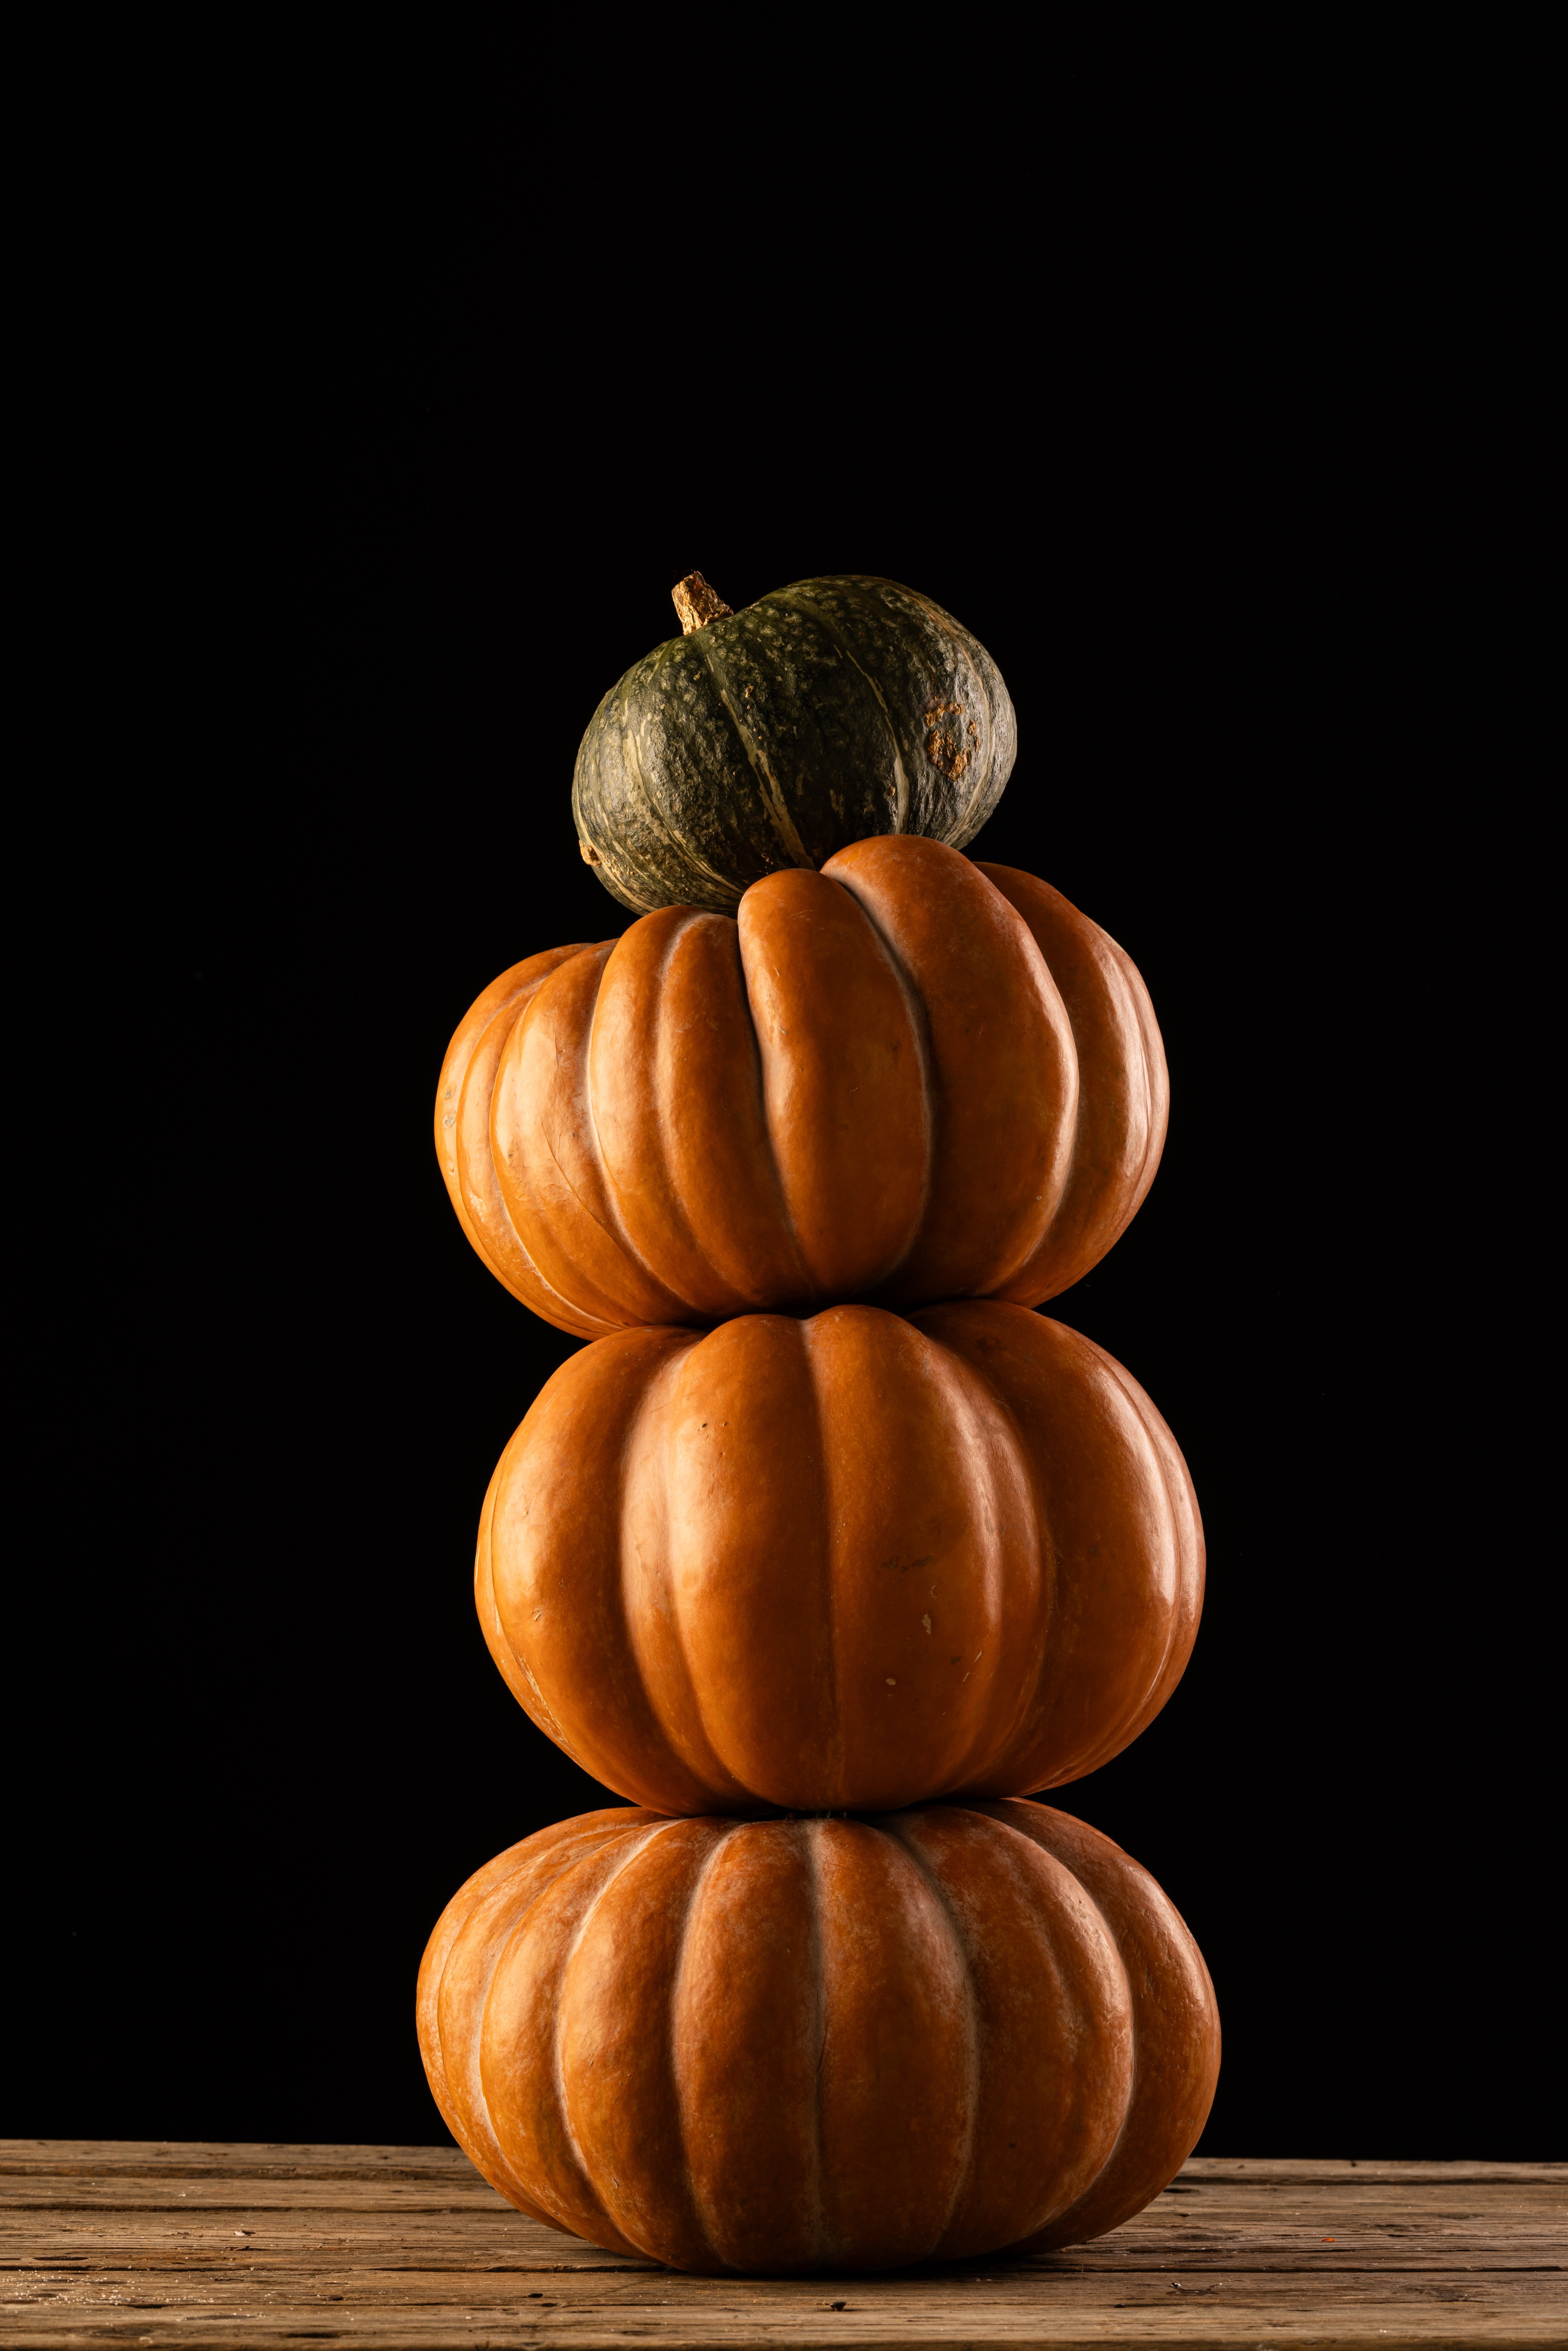 orange-and-green-pumpkins-stacked-up-with-copy-spa-2023-11-27-05-11-43-utc